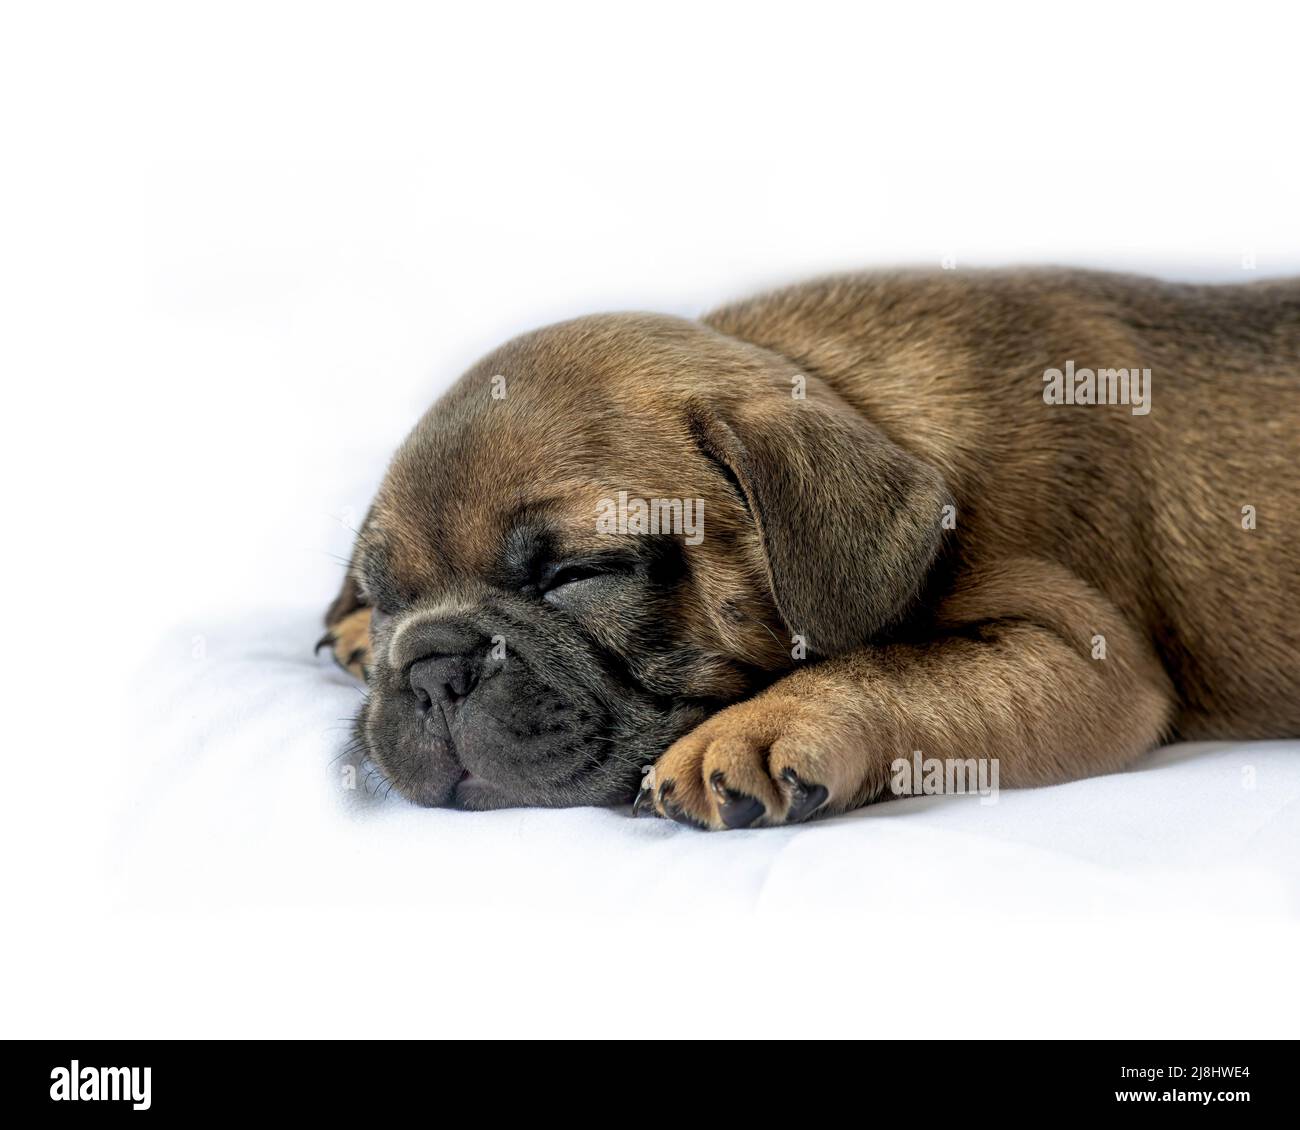 head and shoulders portrait of new puppy sleeping isolated on a white background concept of caring for your new pet pup Stock Photo